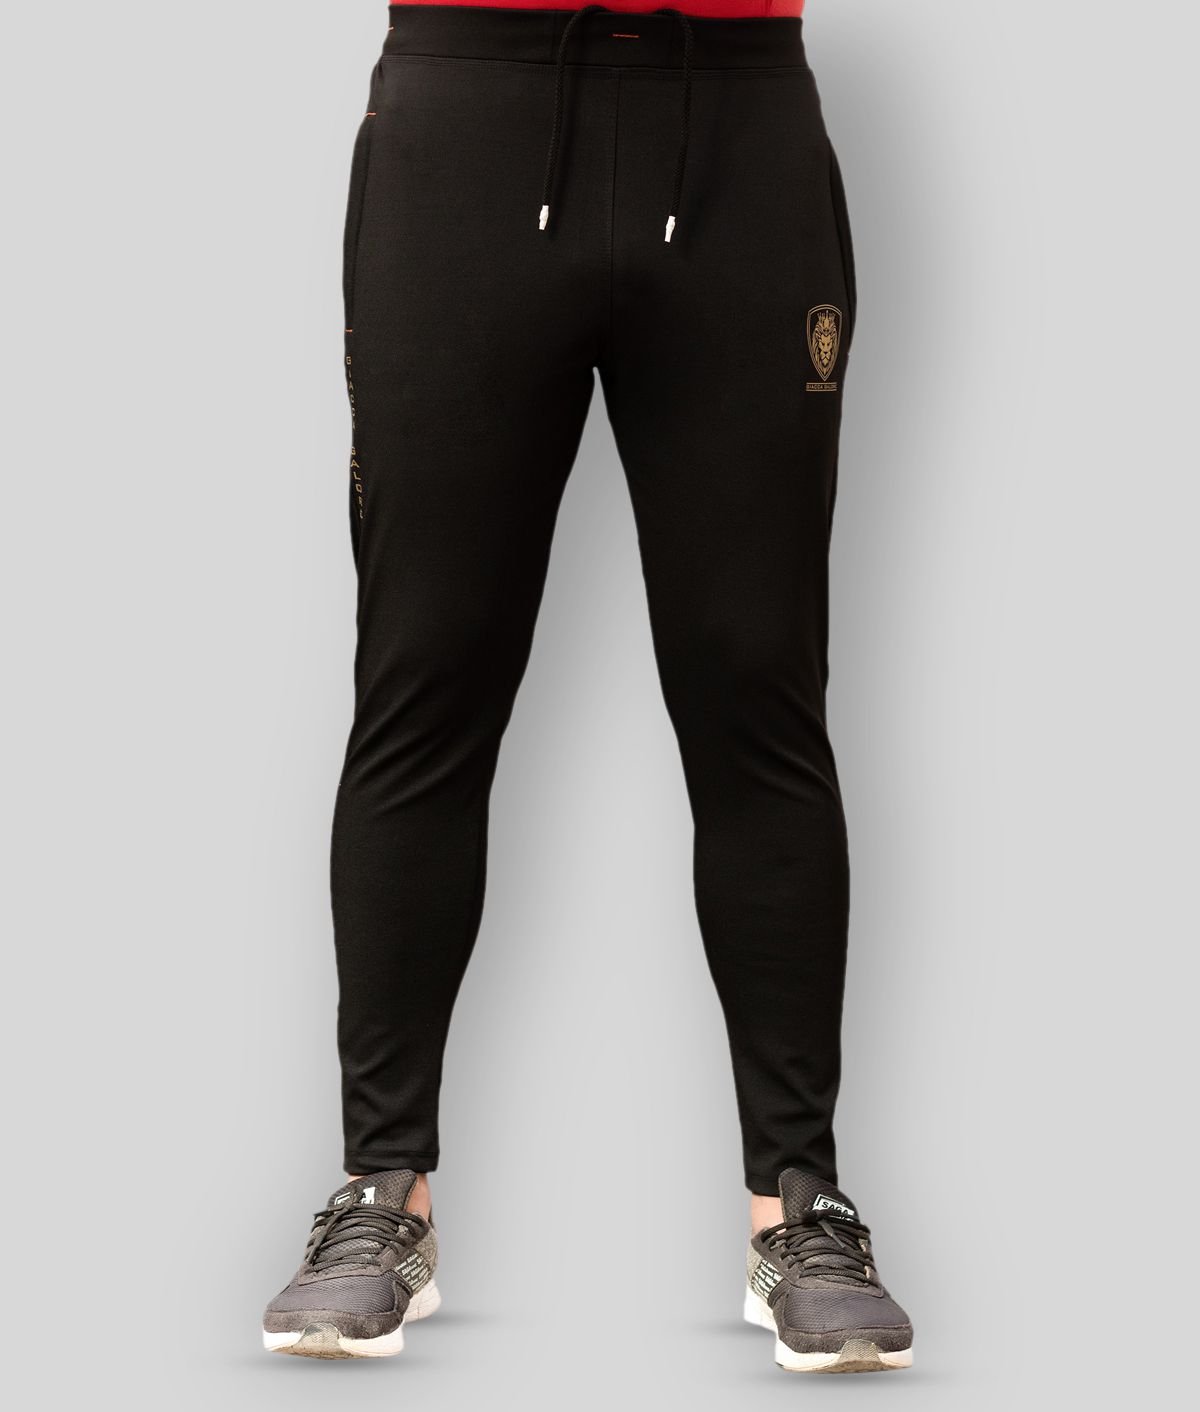 Buy UNIQUE Black Polyester Lycra Trackpants Online at Best Prices in India   Snapdeal